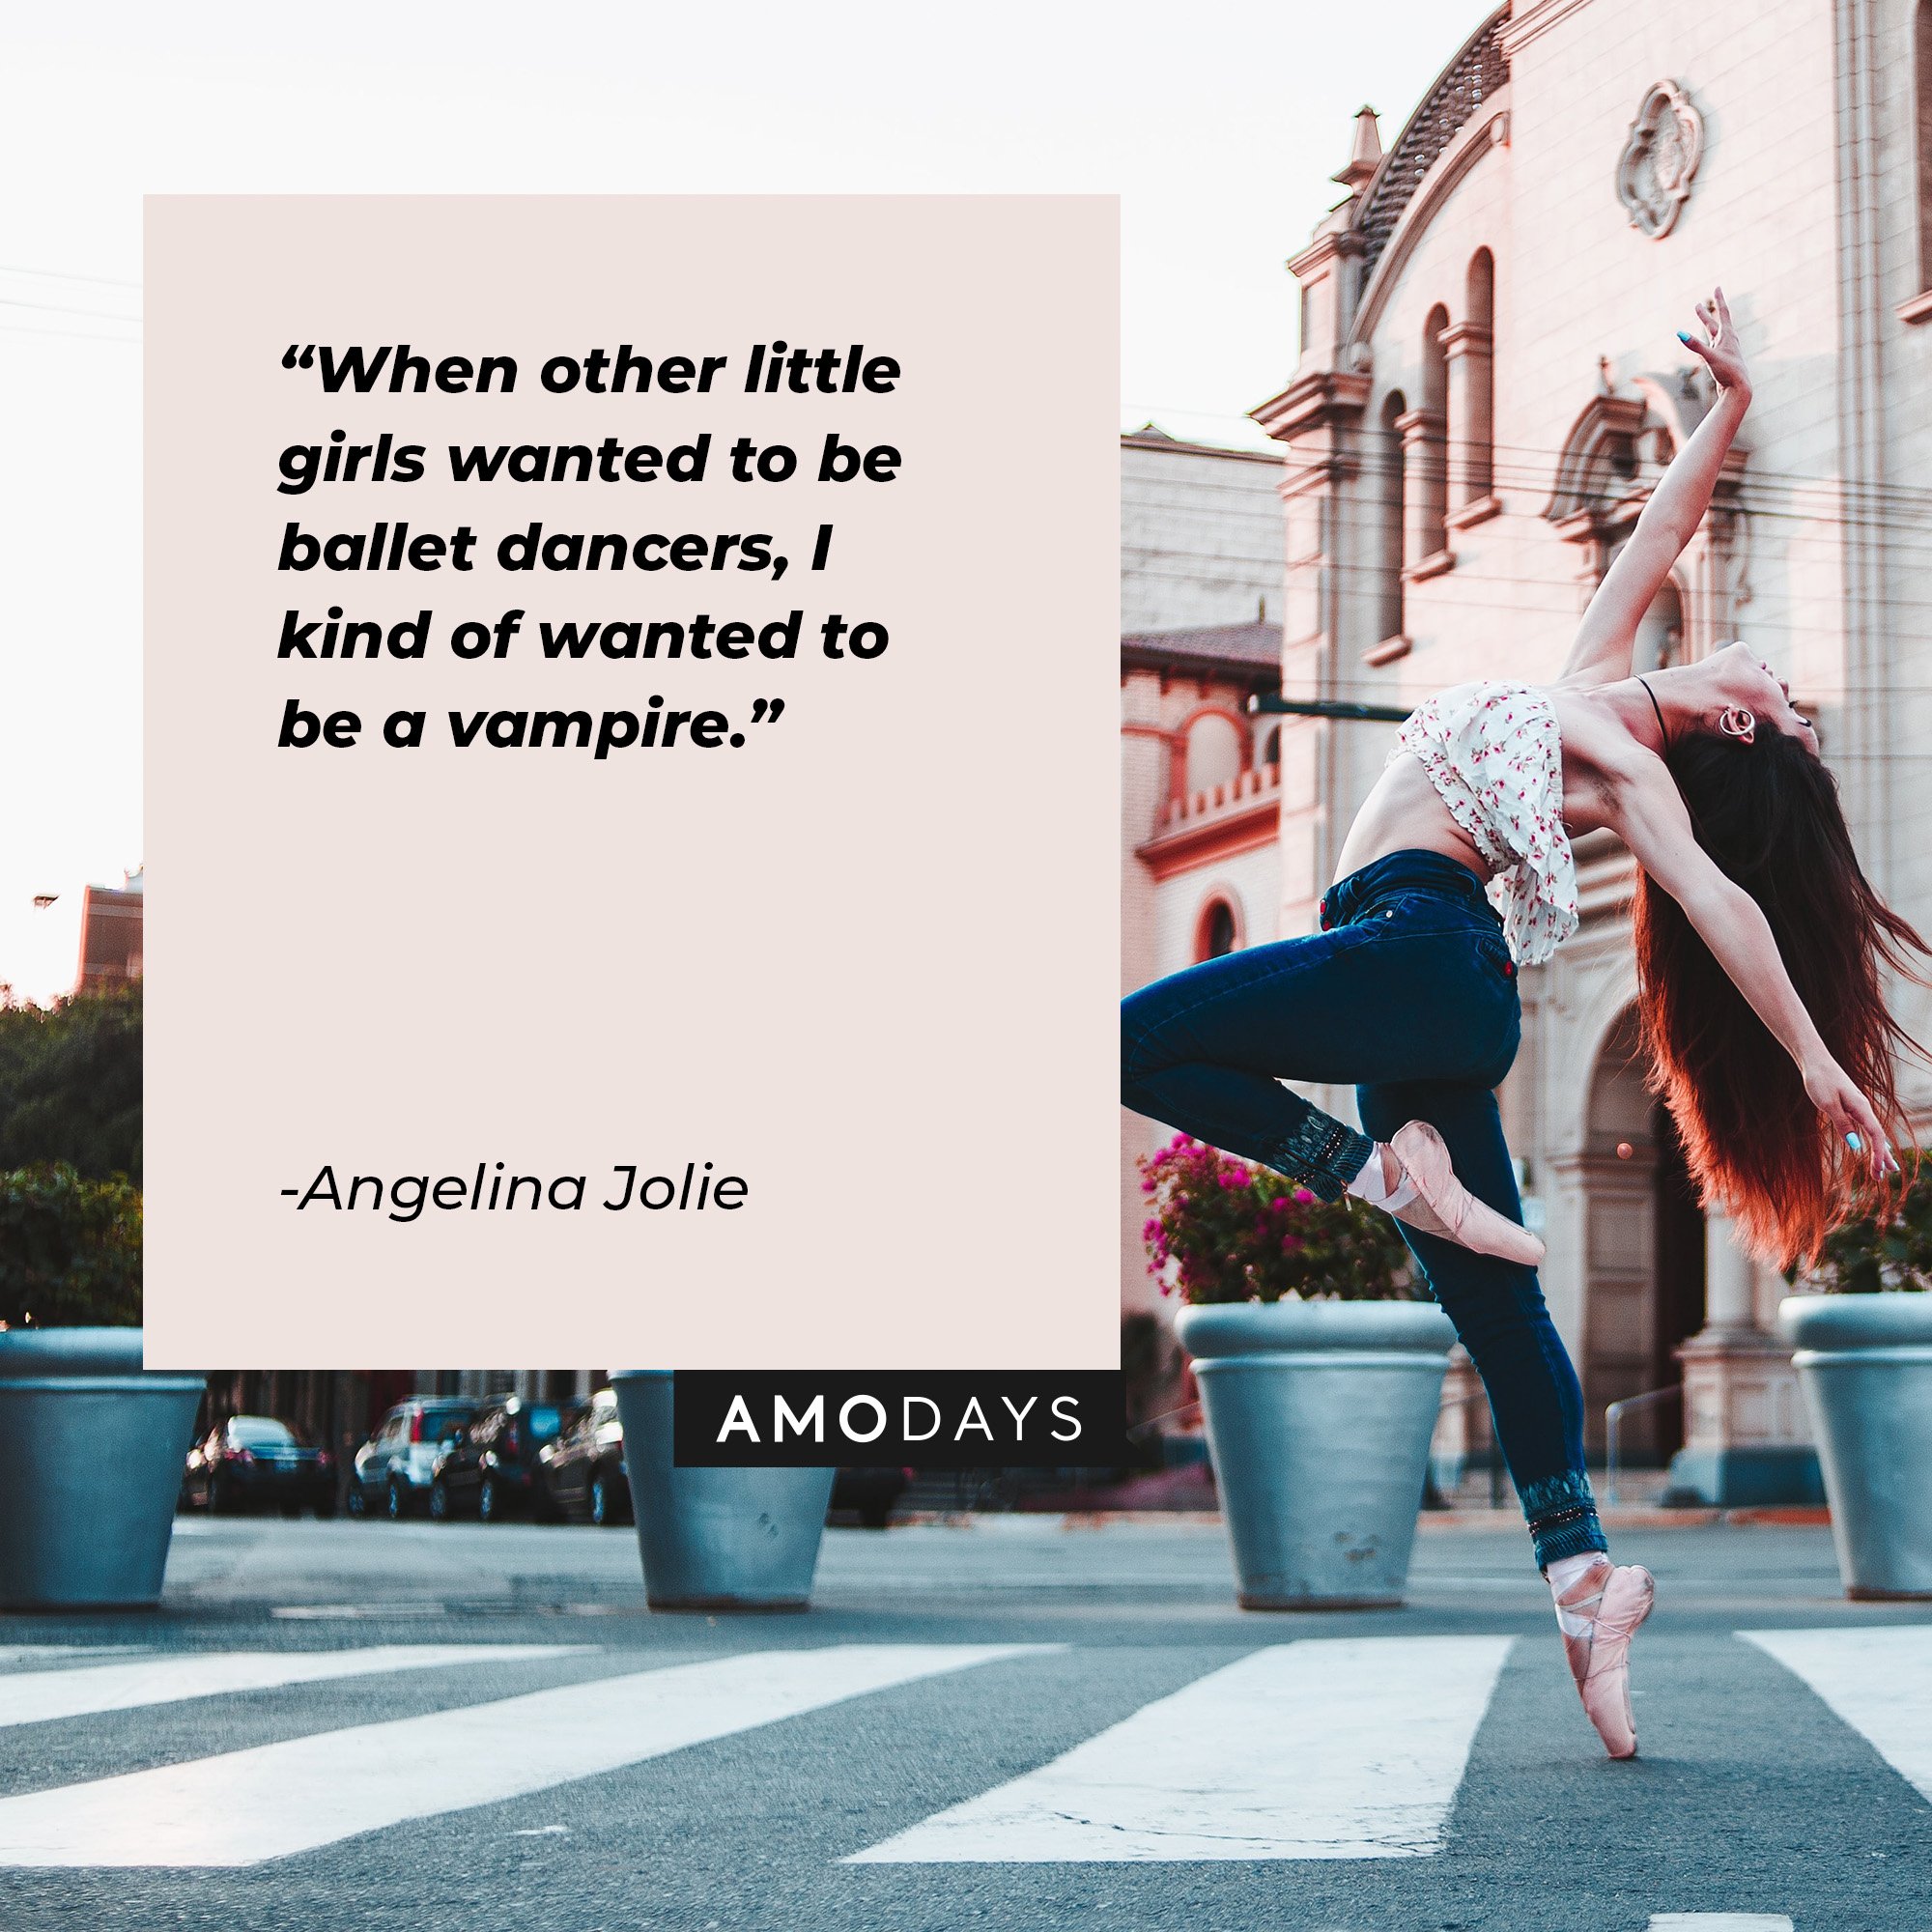 Angelina Jolie’s quote: “When other little girls wanted to be ballet dancers, I kind of wanted to be a vampire.” | Image: AmoDays